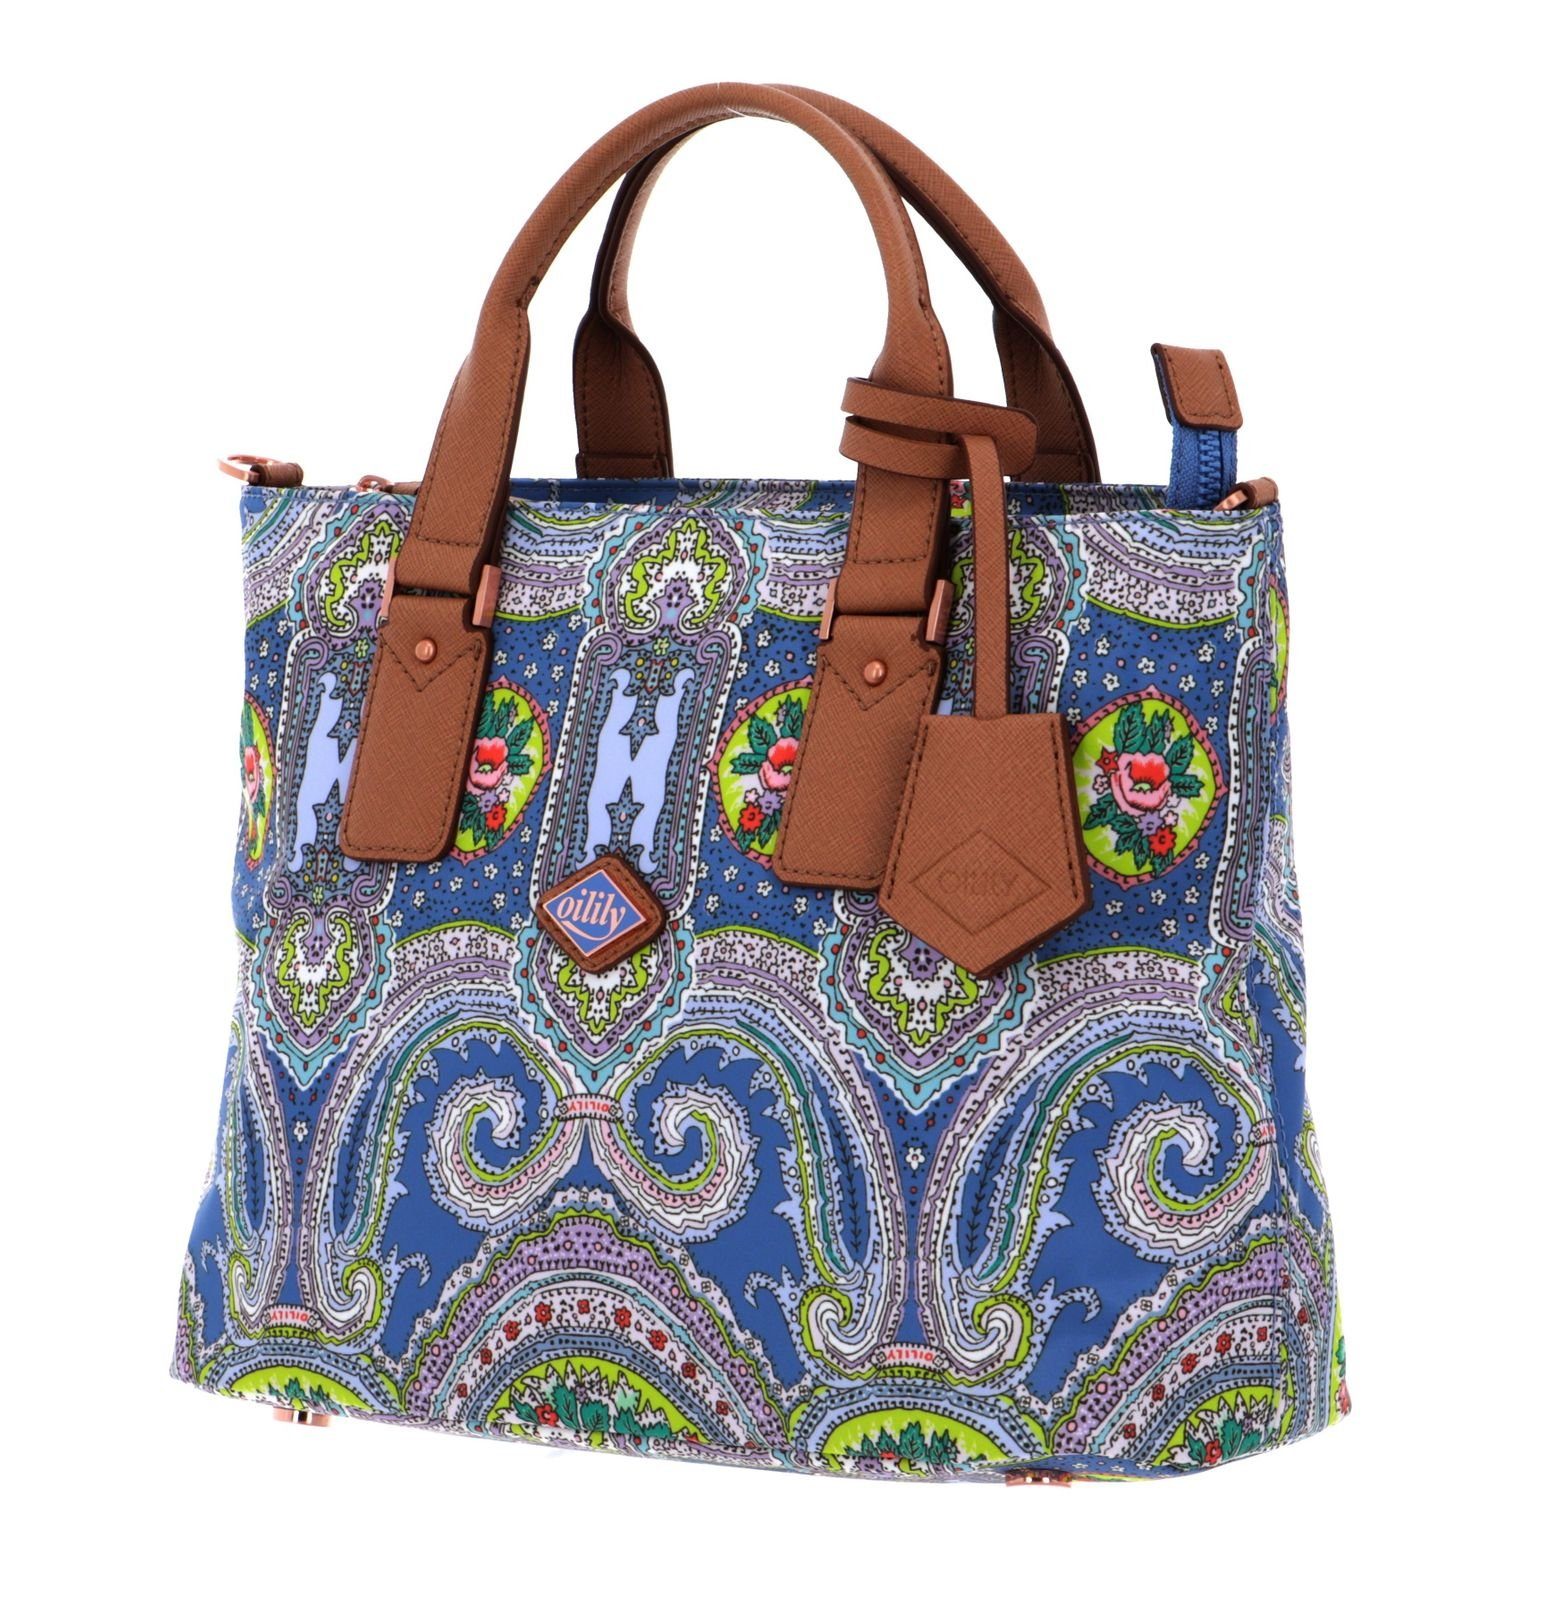 Paisley Rose Handtasche Oilily City Riviera